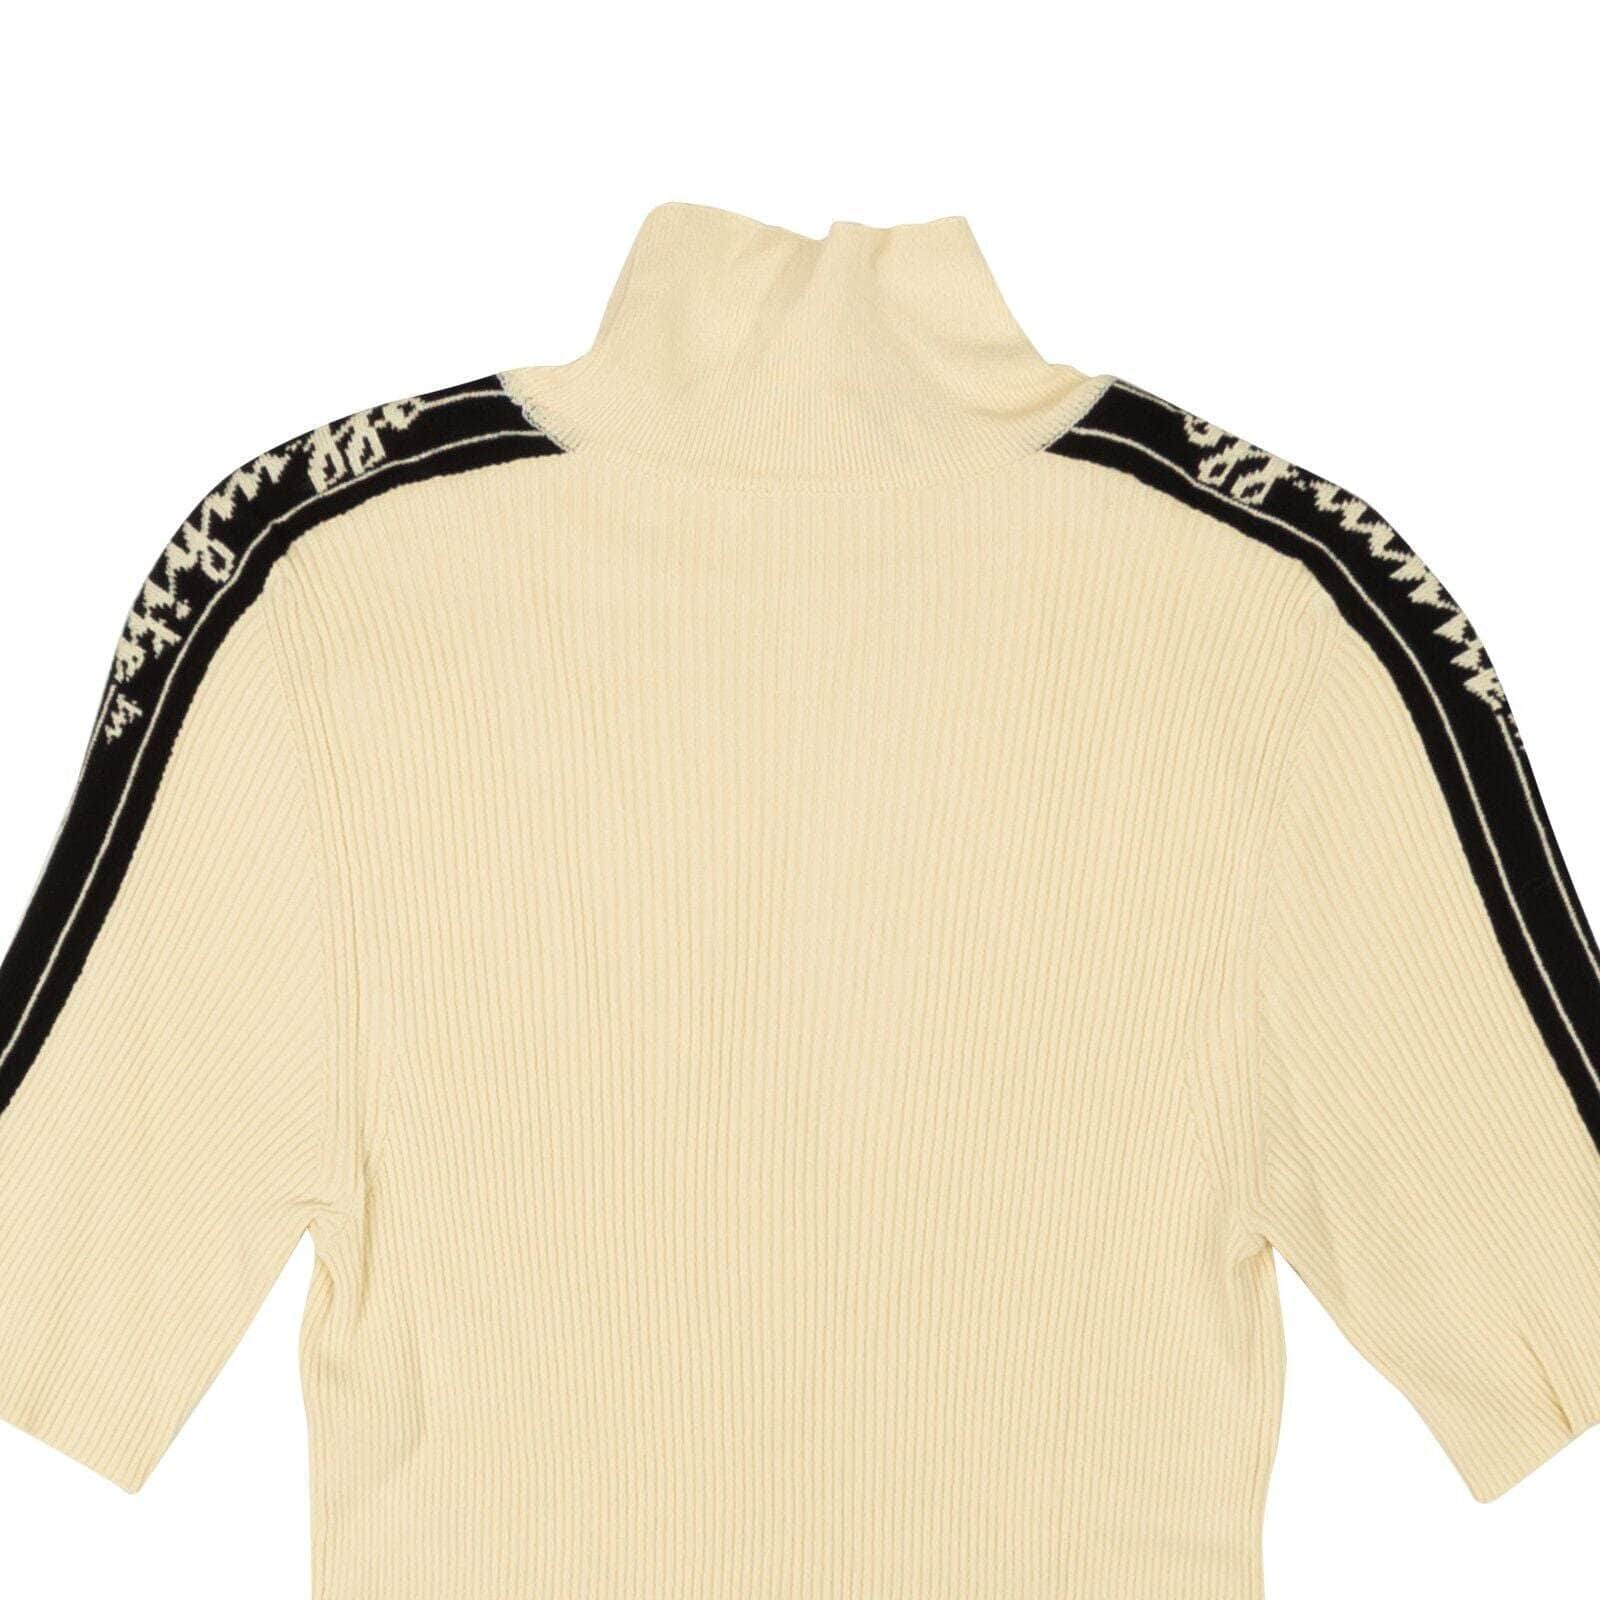 Off-White c/o Virgil Abloh 250-500, channelenable-all, chicmi, couponcollection, gender-womens, main-clothing, off-white-c-o-virgil-abloh, size-40, womens-turtleneck-sweaters 40 Beige Logo Turtleneck Sweater 95-OFW-1956/40 95-OFW-1956/40